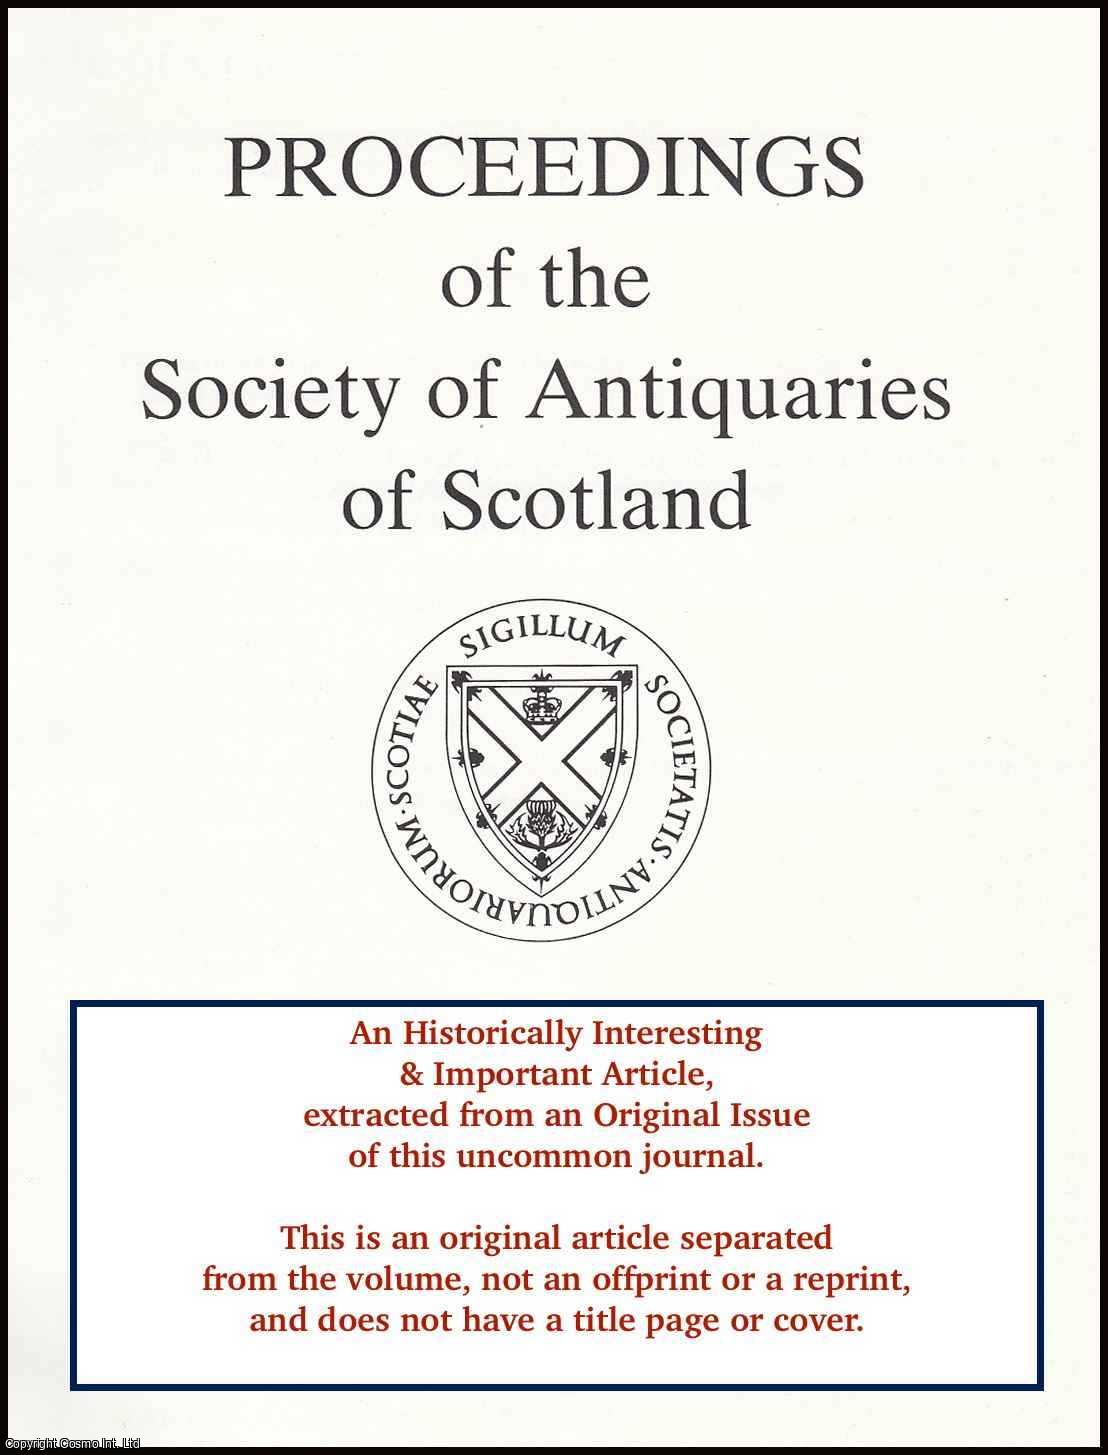 J. D. Bateson & N. M. McQ Holmes - Roman and Medieval Coins Found in Scotland, 1988-95. An original article from the Proceedings of the Society of Antiquaries of Scotland, 1997.